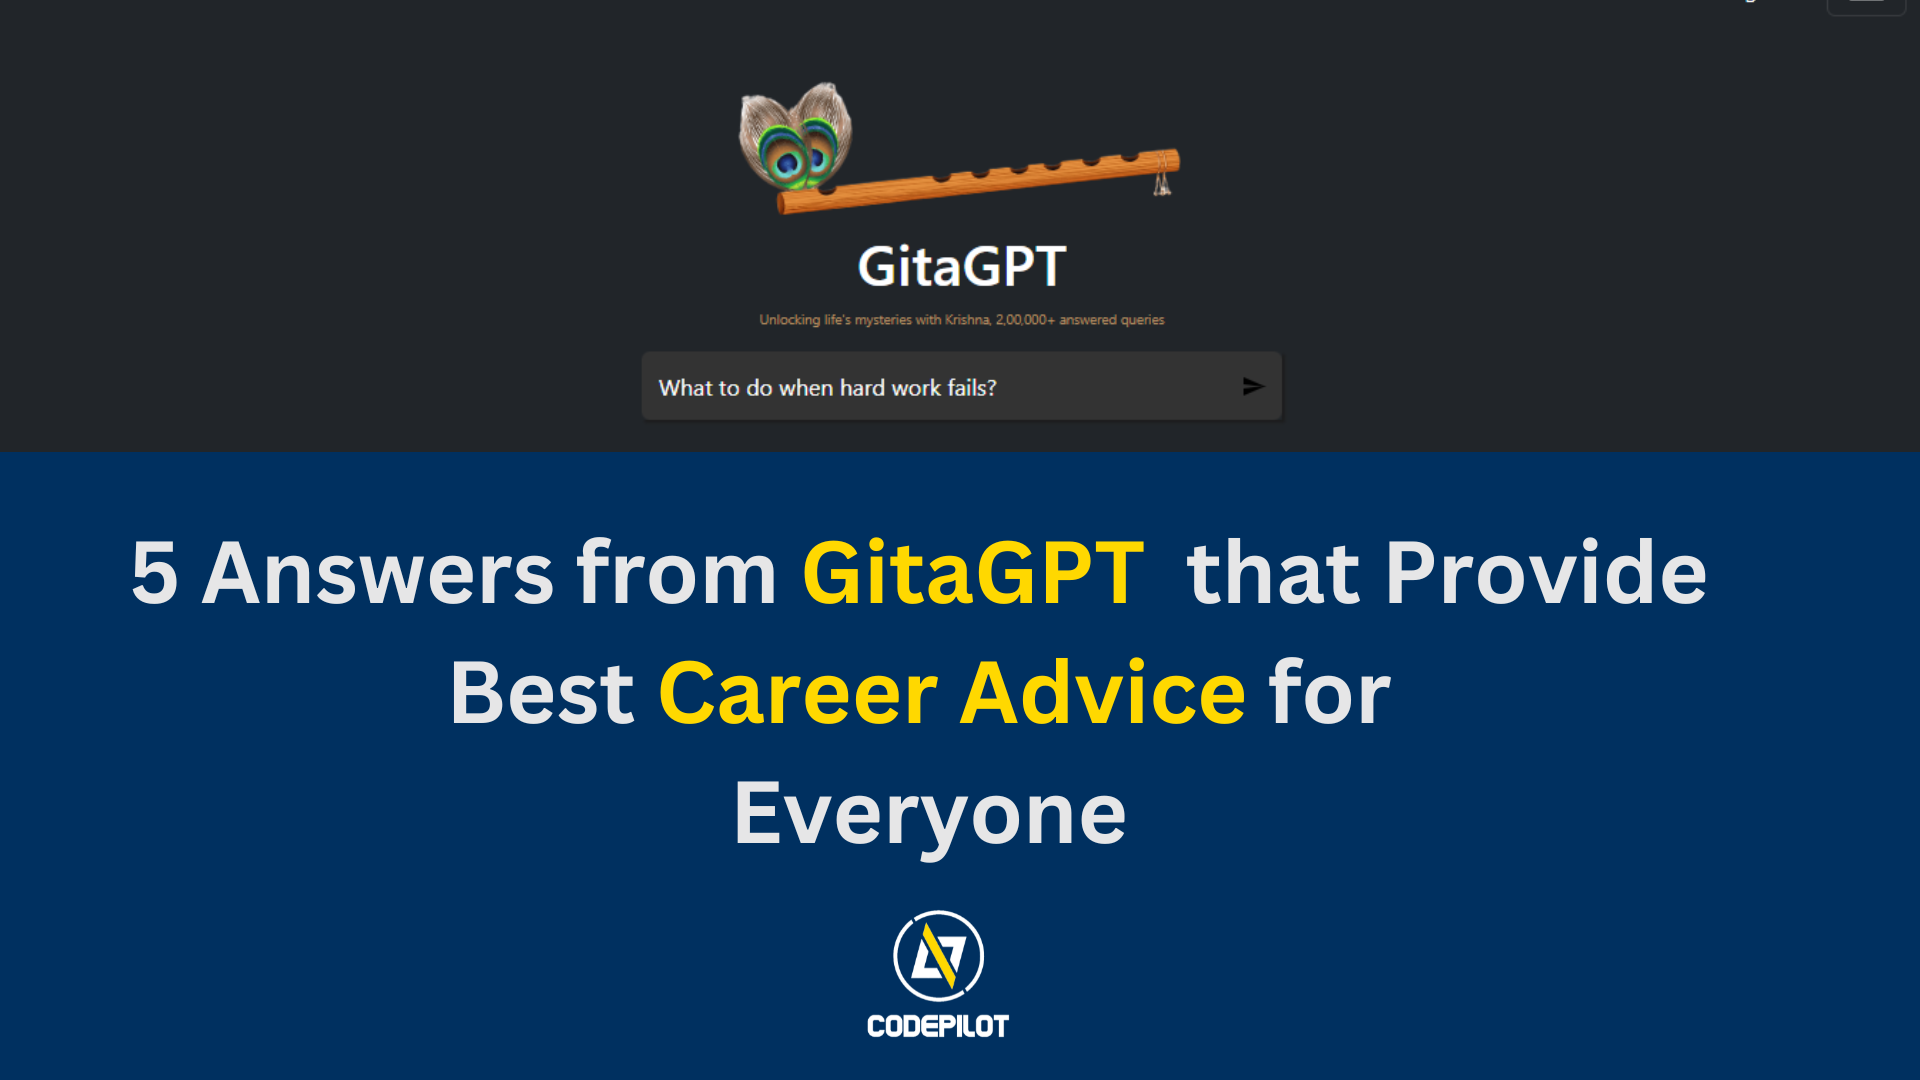 5 Answers from GitaGPT that Provide Best Career Advice for Everyone